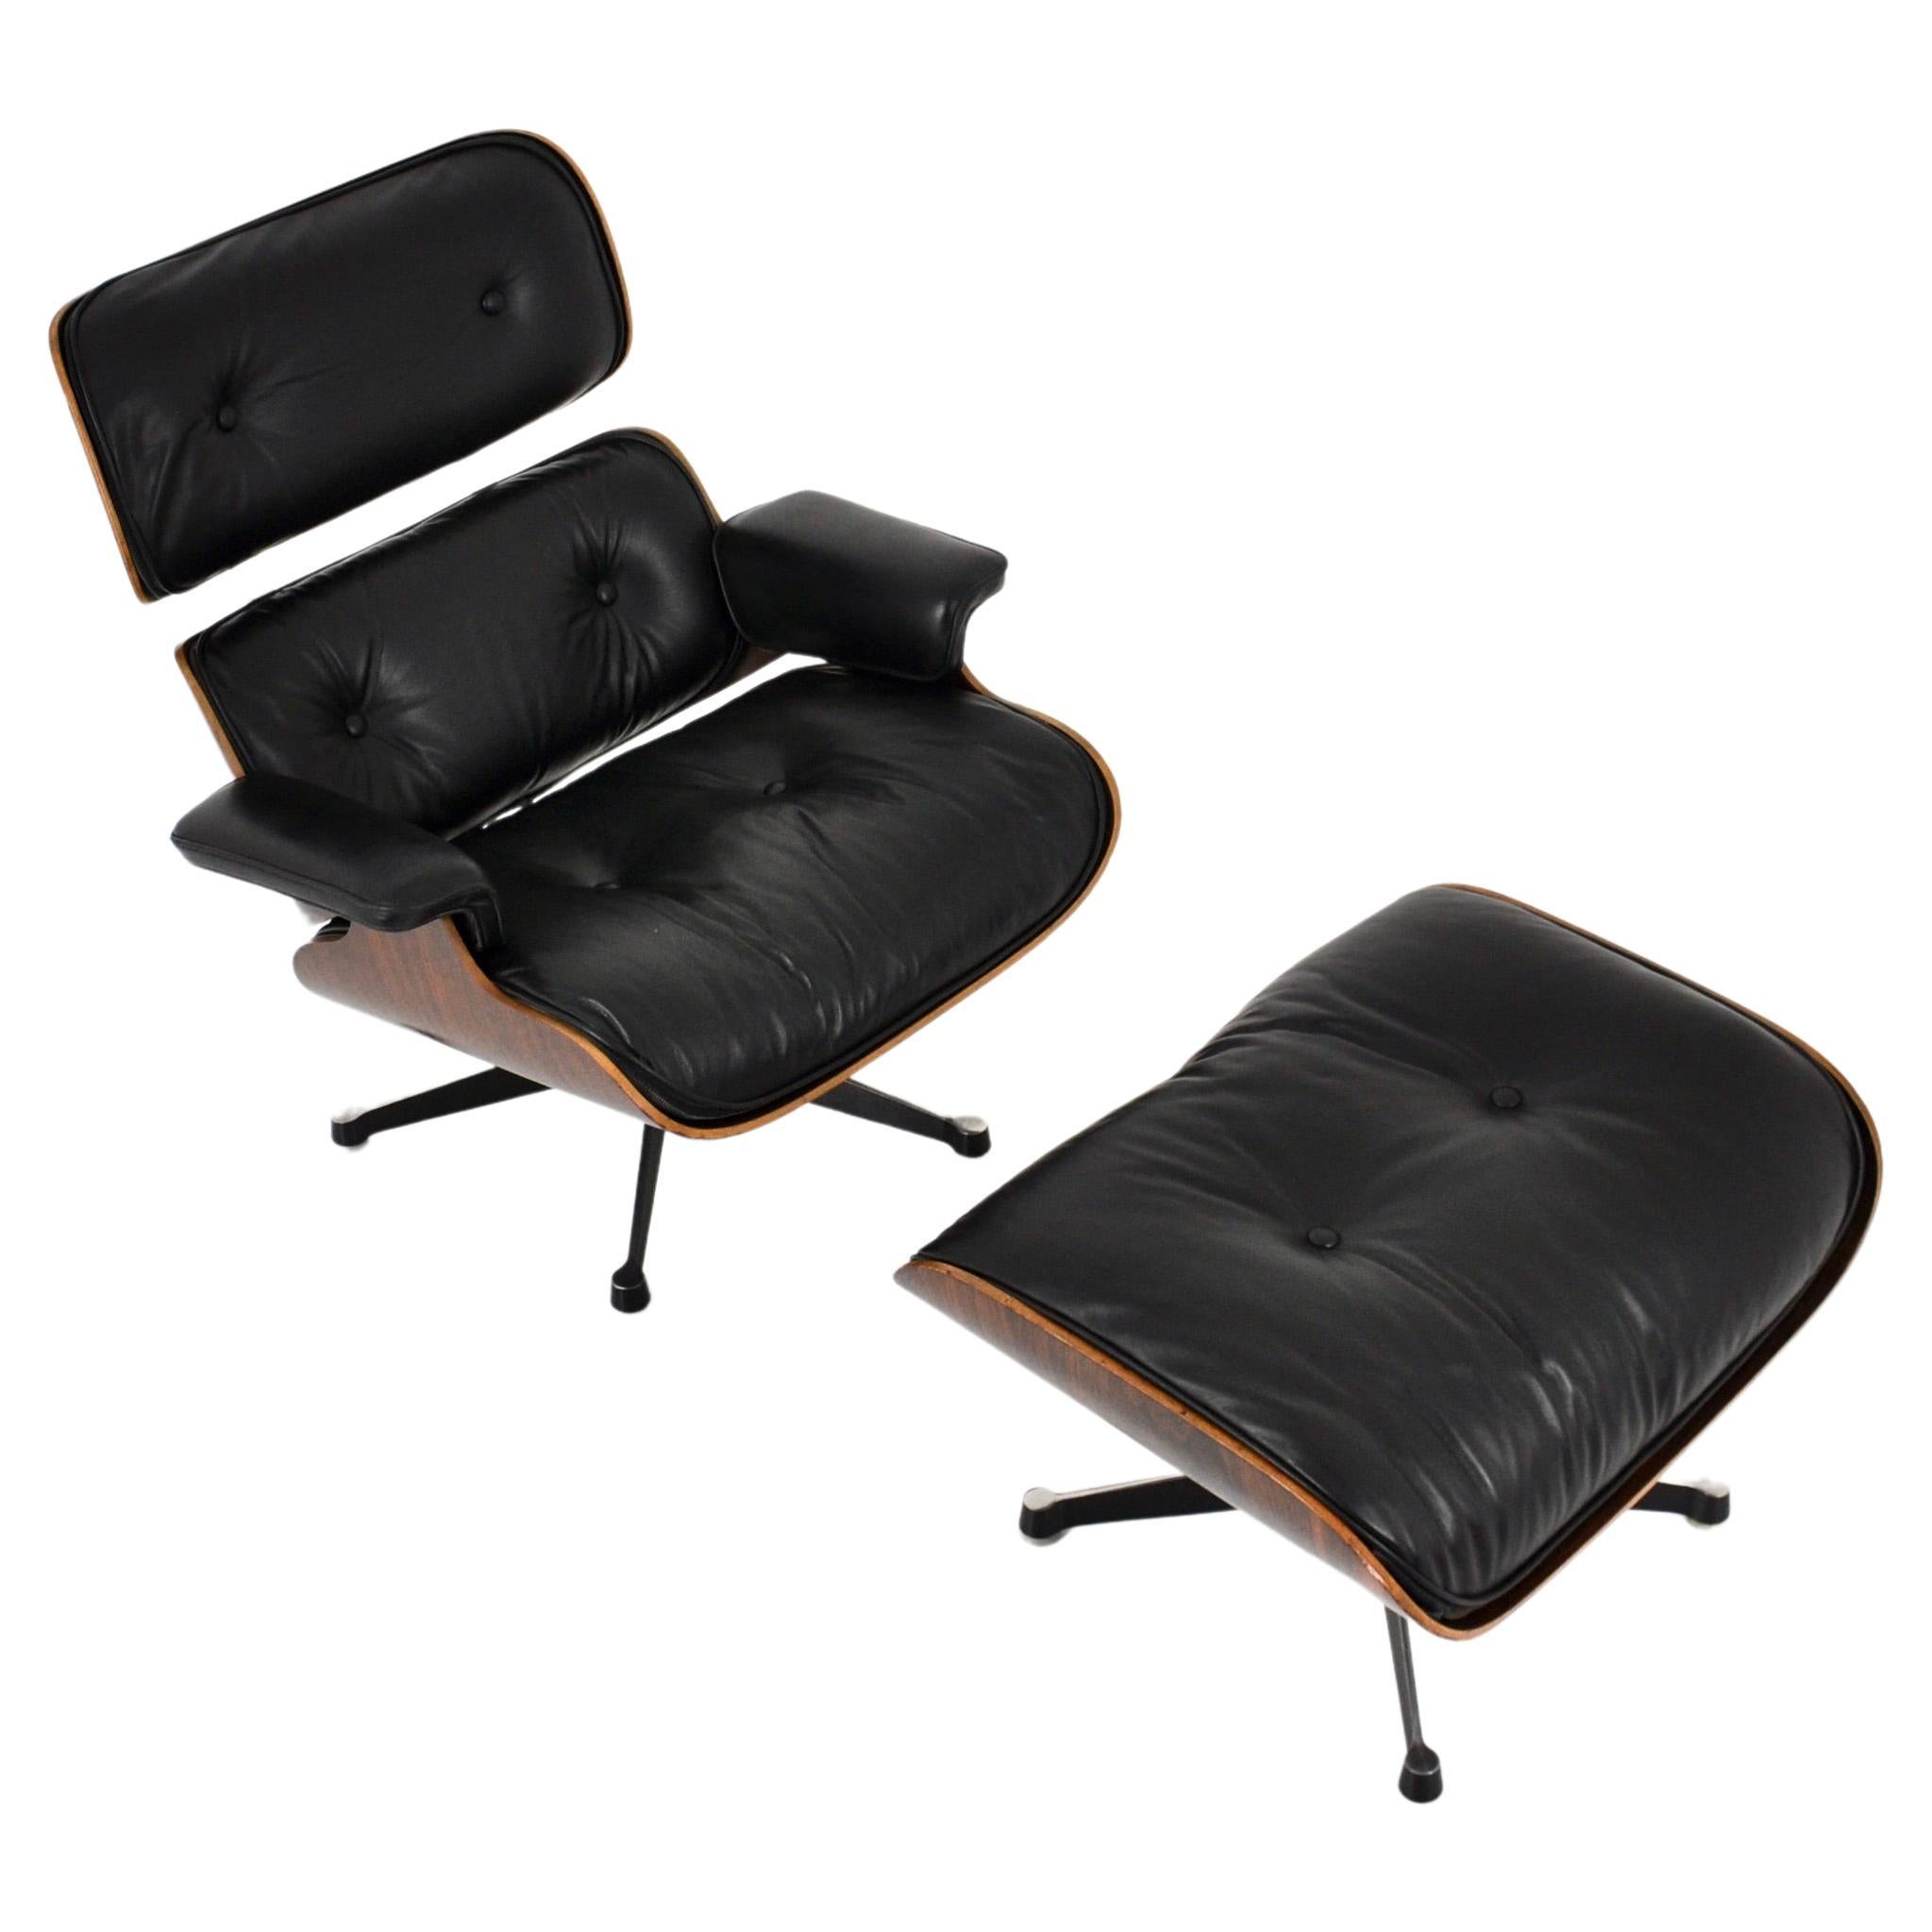 Black leather and wood armchair by Charles and Ray Eames for Herman Miller International. New leather. Wear due to time and age of the chair (see photo). Seat height : 41 cm.
Ottoman dimensions: H: 44cm W: 66cm D: 53cm.